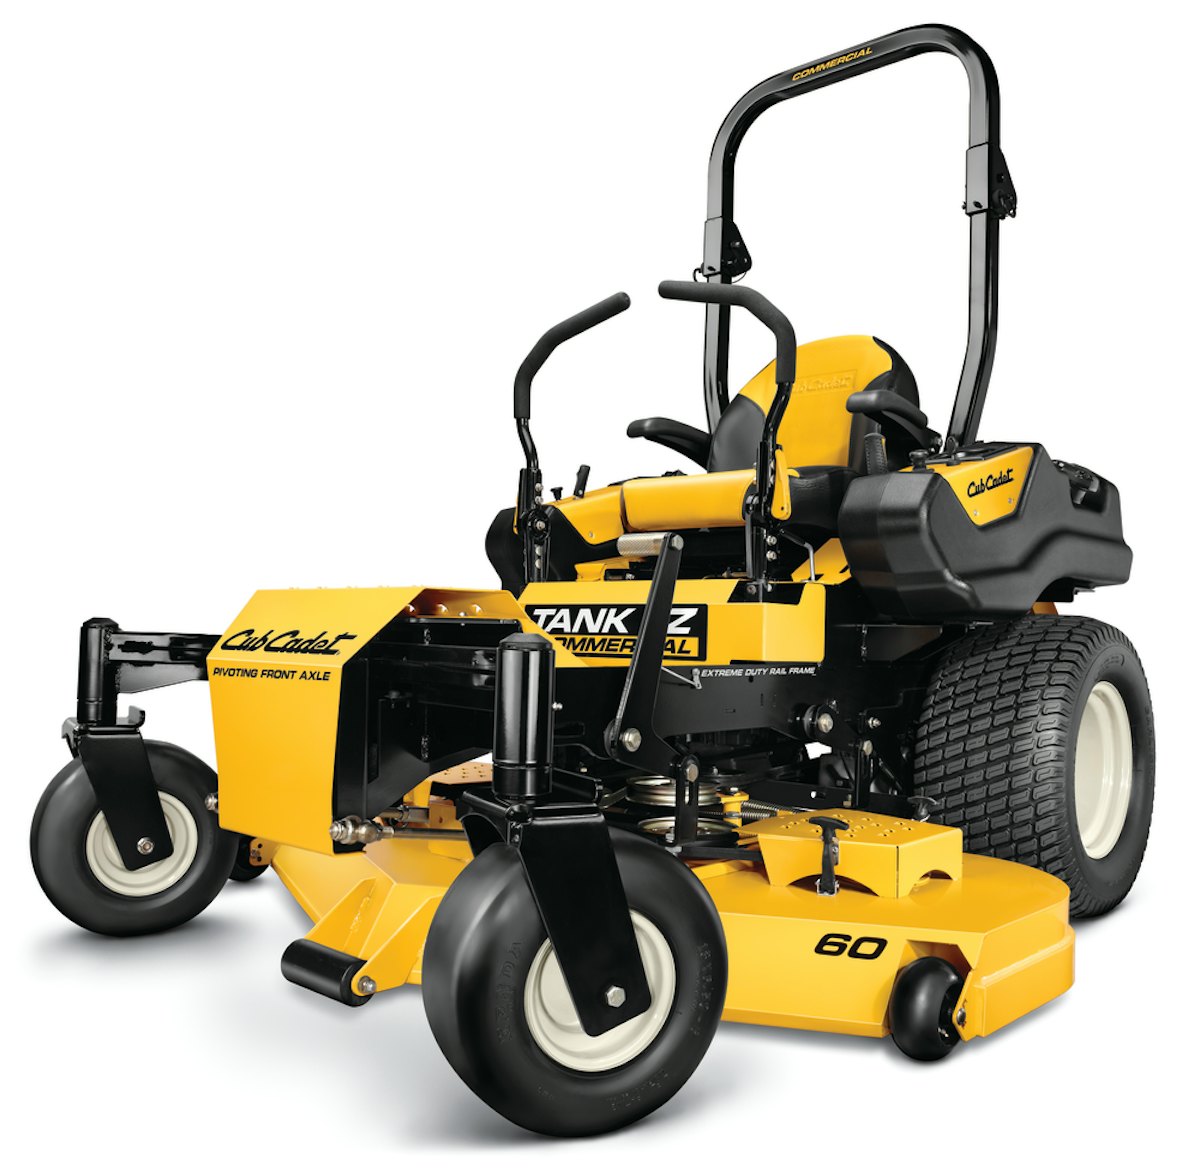 MTD Products Recalls Cub Cadet Commercial Mowers Risk of Fire | Green ...